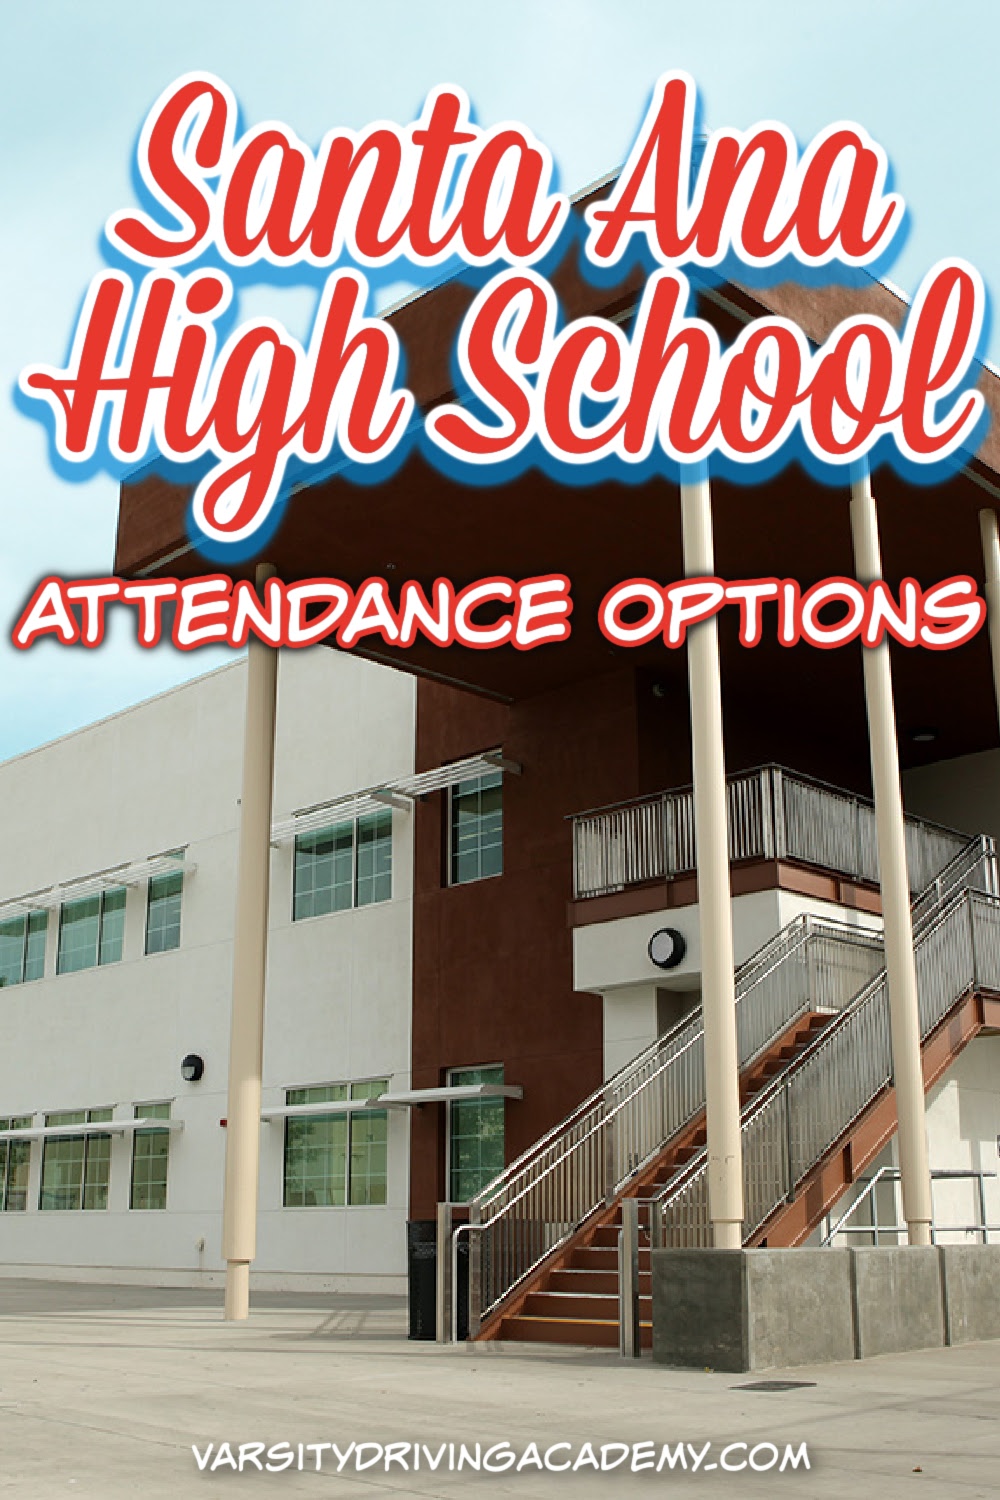 There are six different Santa Ana high school attendance options and each one comes with its own boundary map and service areas. 